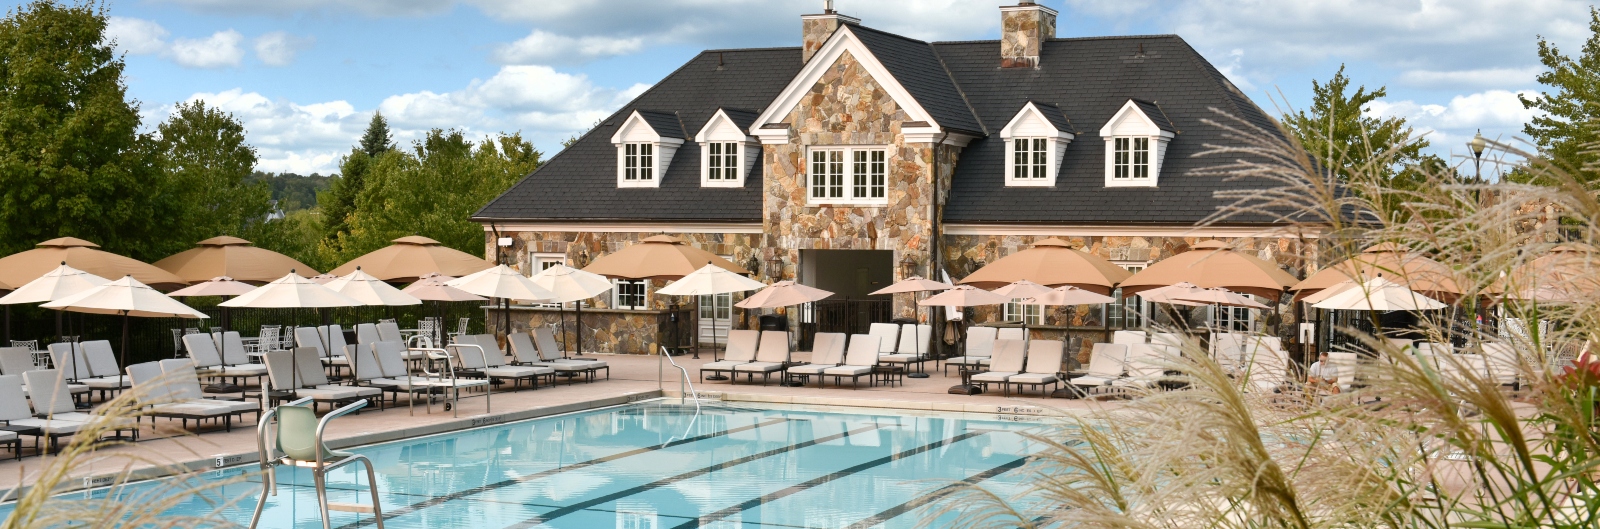 The Tennis and Pool Facilities At Trump National Golf Club Westchester, Briarcliff Manor, Ny